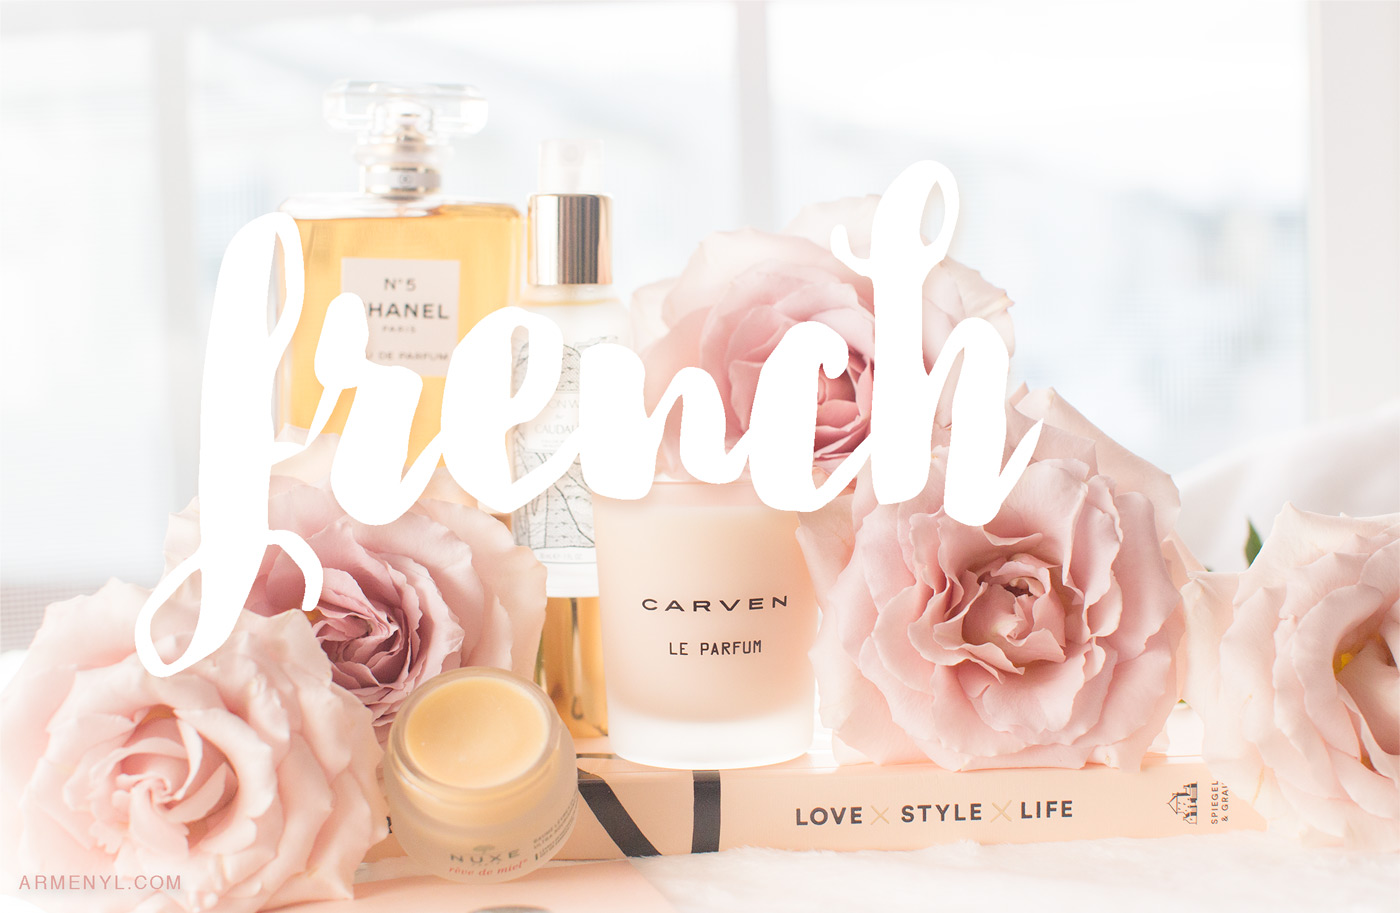 The best french beauty products every woman should have by Armenyl.com